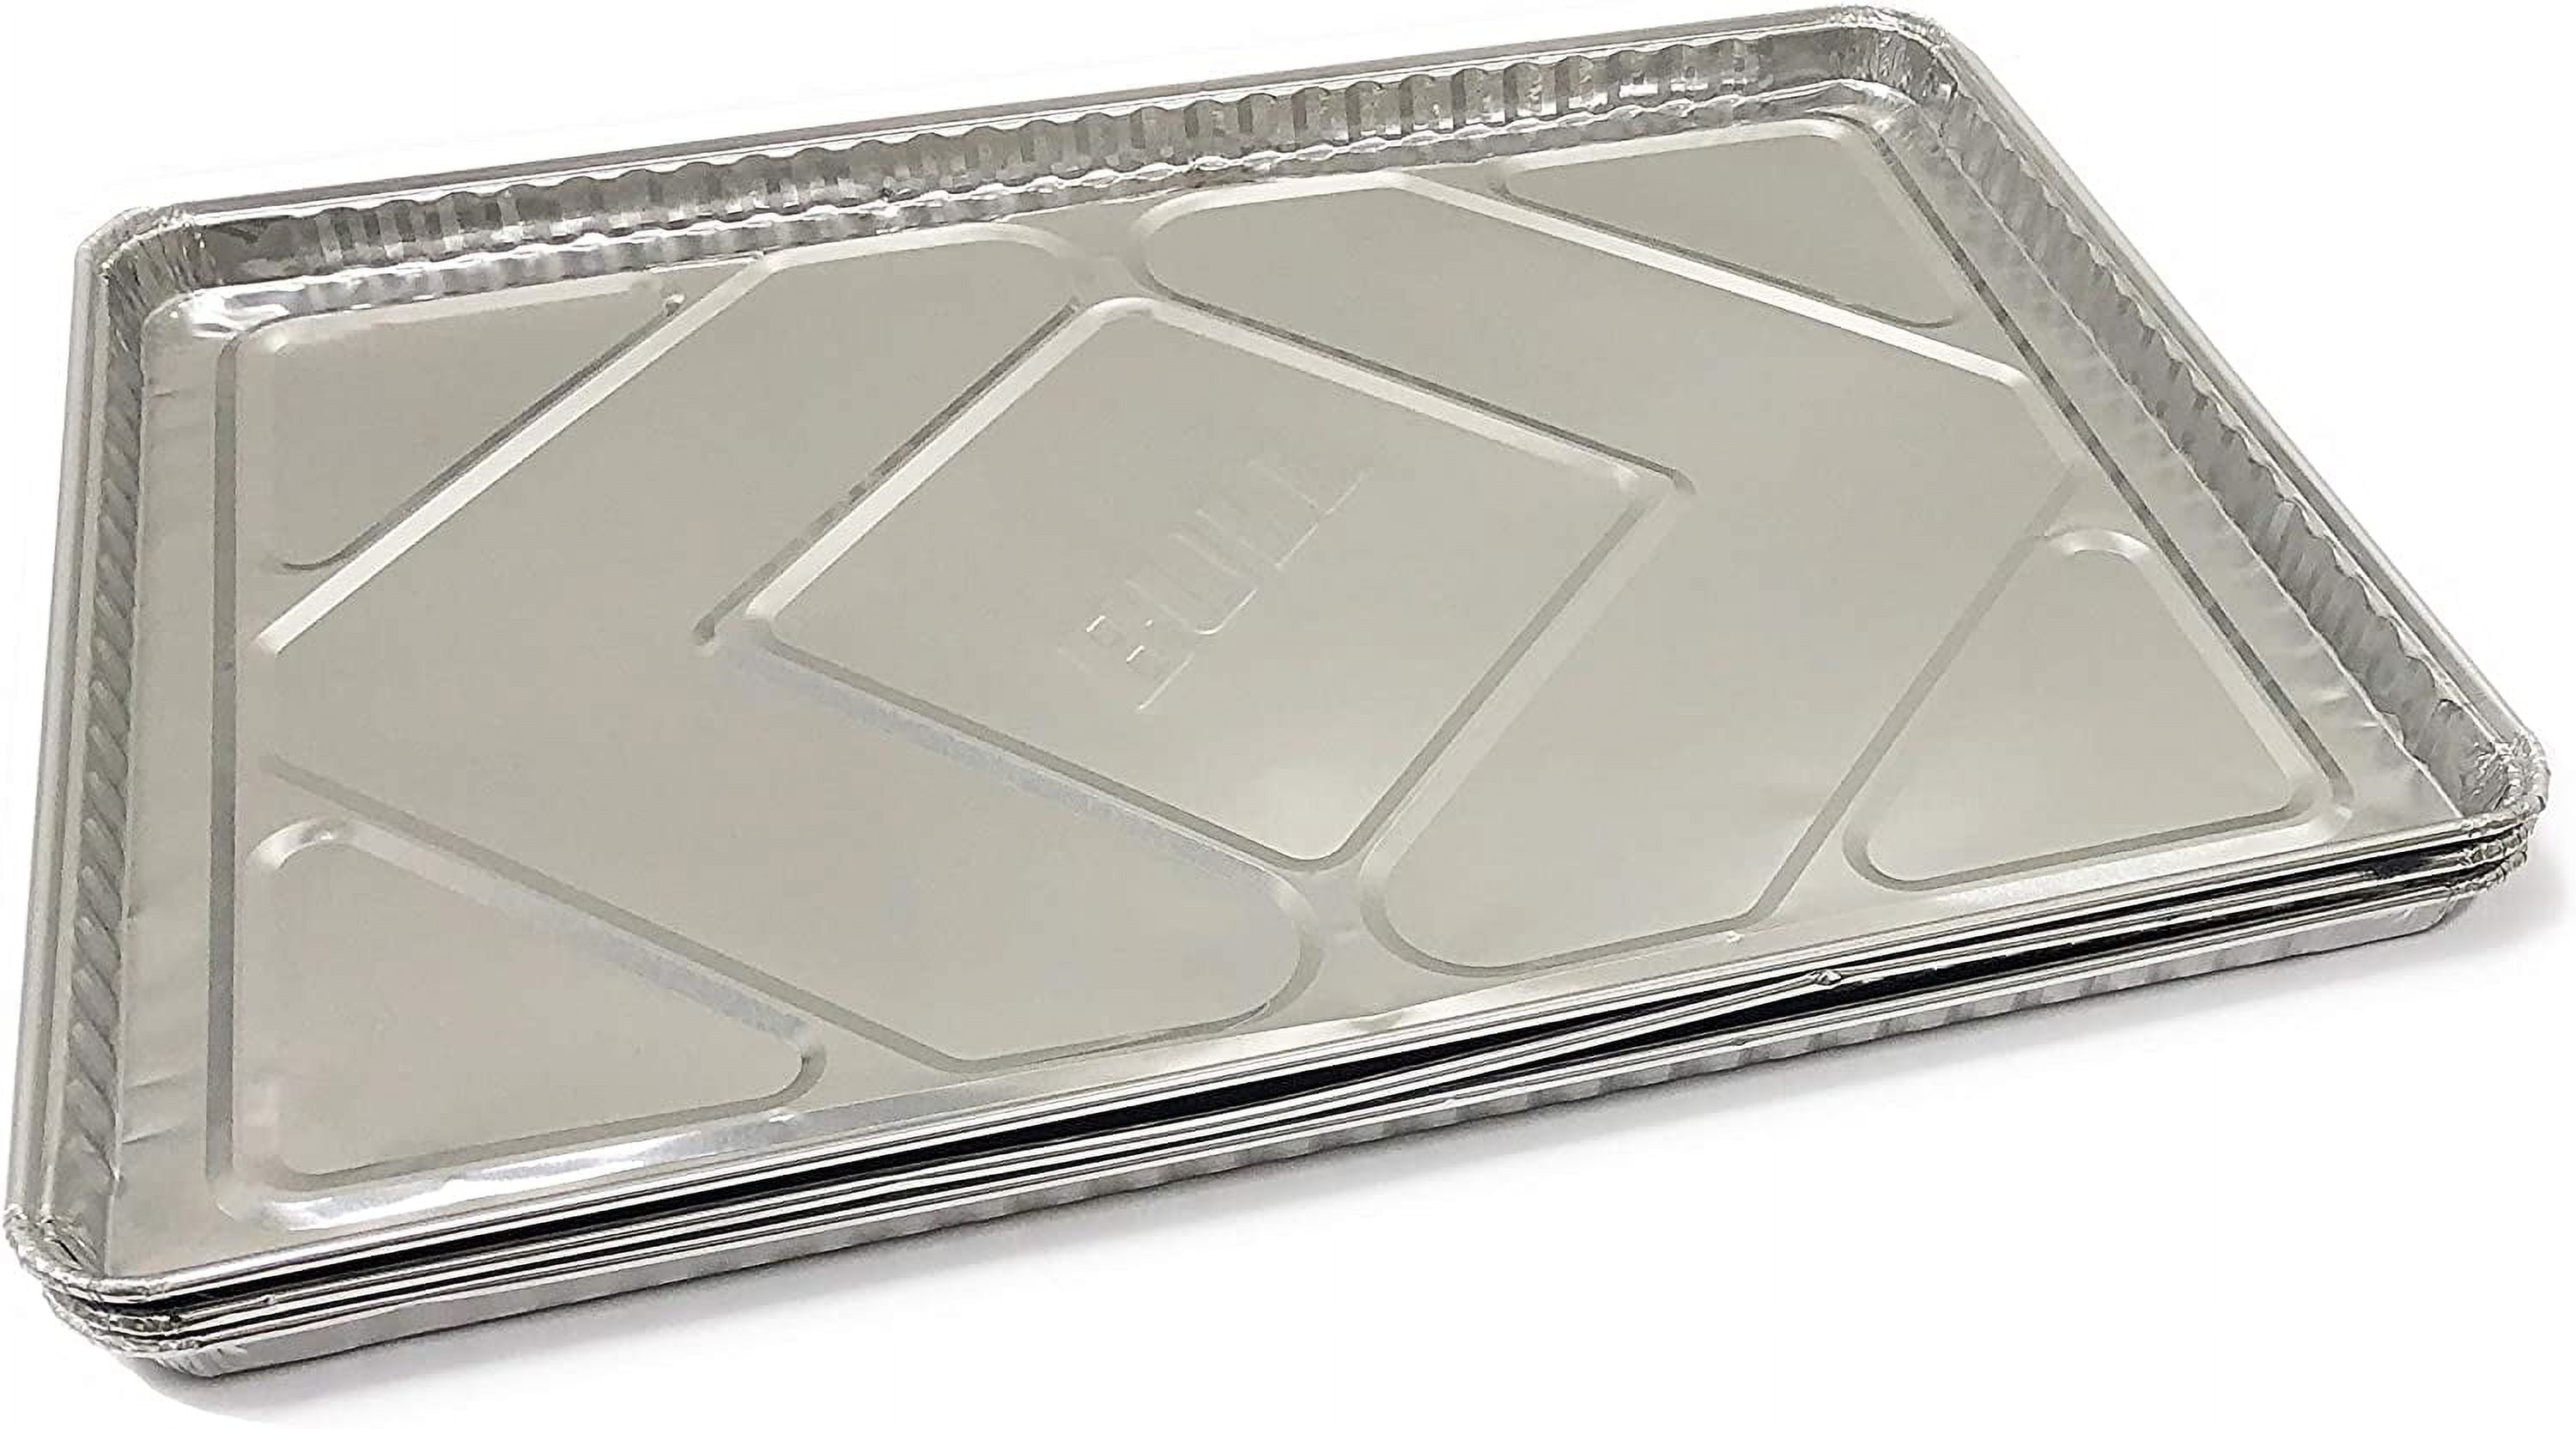 Bull BBQ 21-Inch X 15-Inch Drip Pan Grease Tray Liners - Fits Bull BBQ  30-Inch 4-Burner Gas Grills - Set Of 3 - 24255